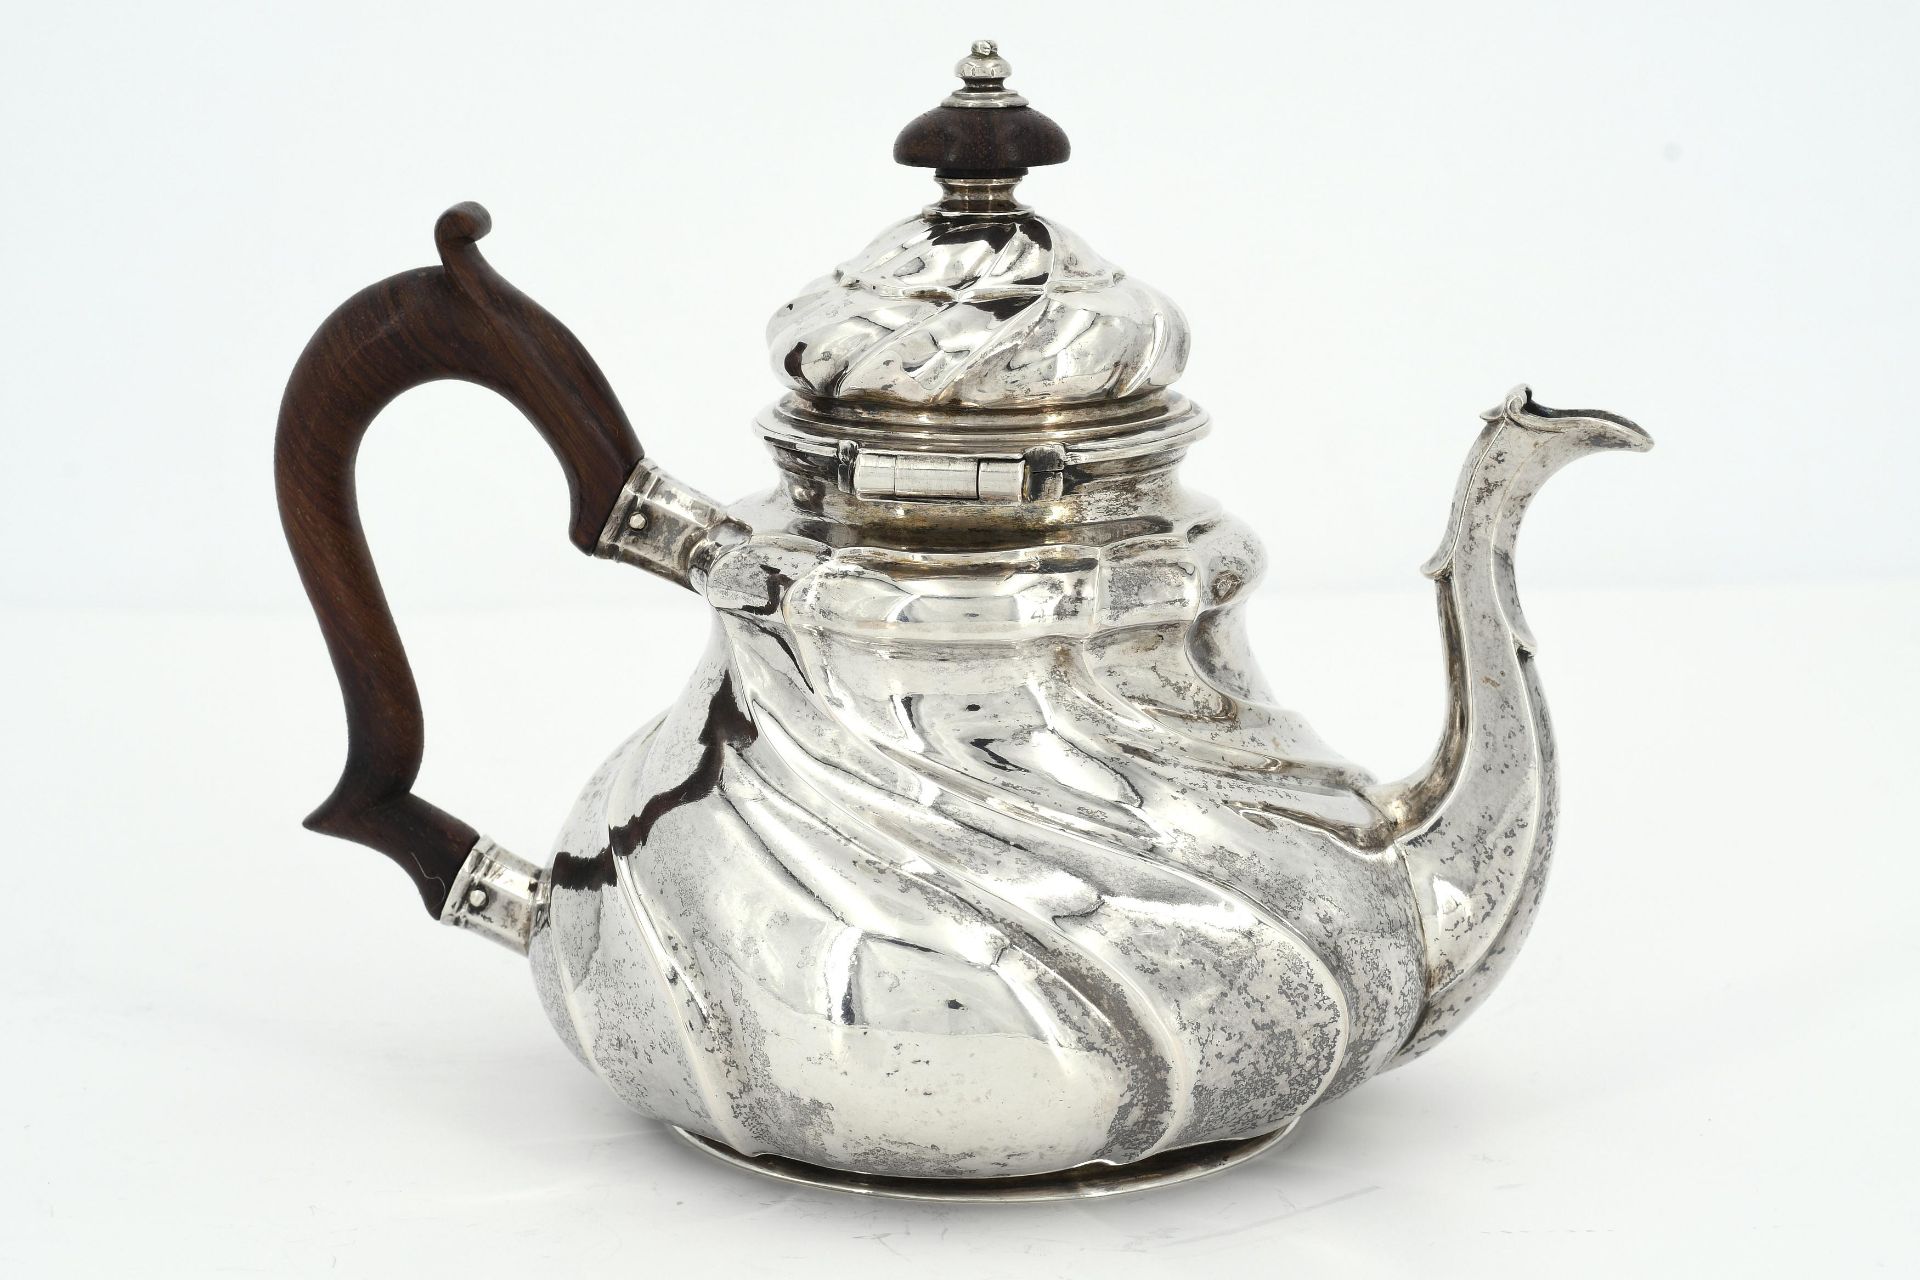 SILVER TEAPOT WITH TWIST-FLUTED FEATURES. - Image 3 of 6